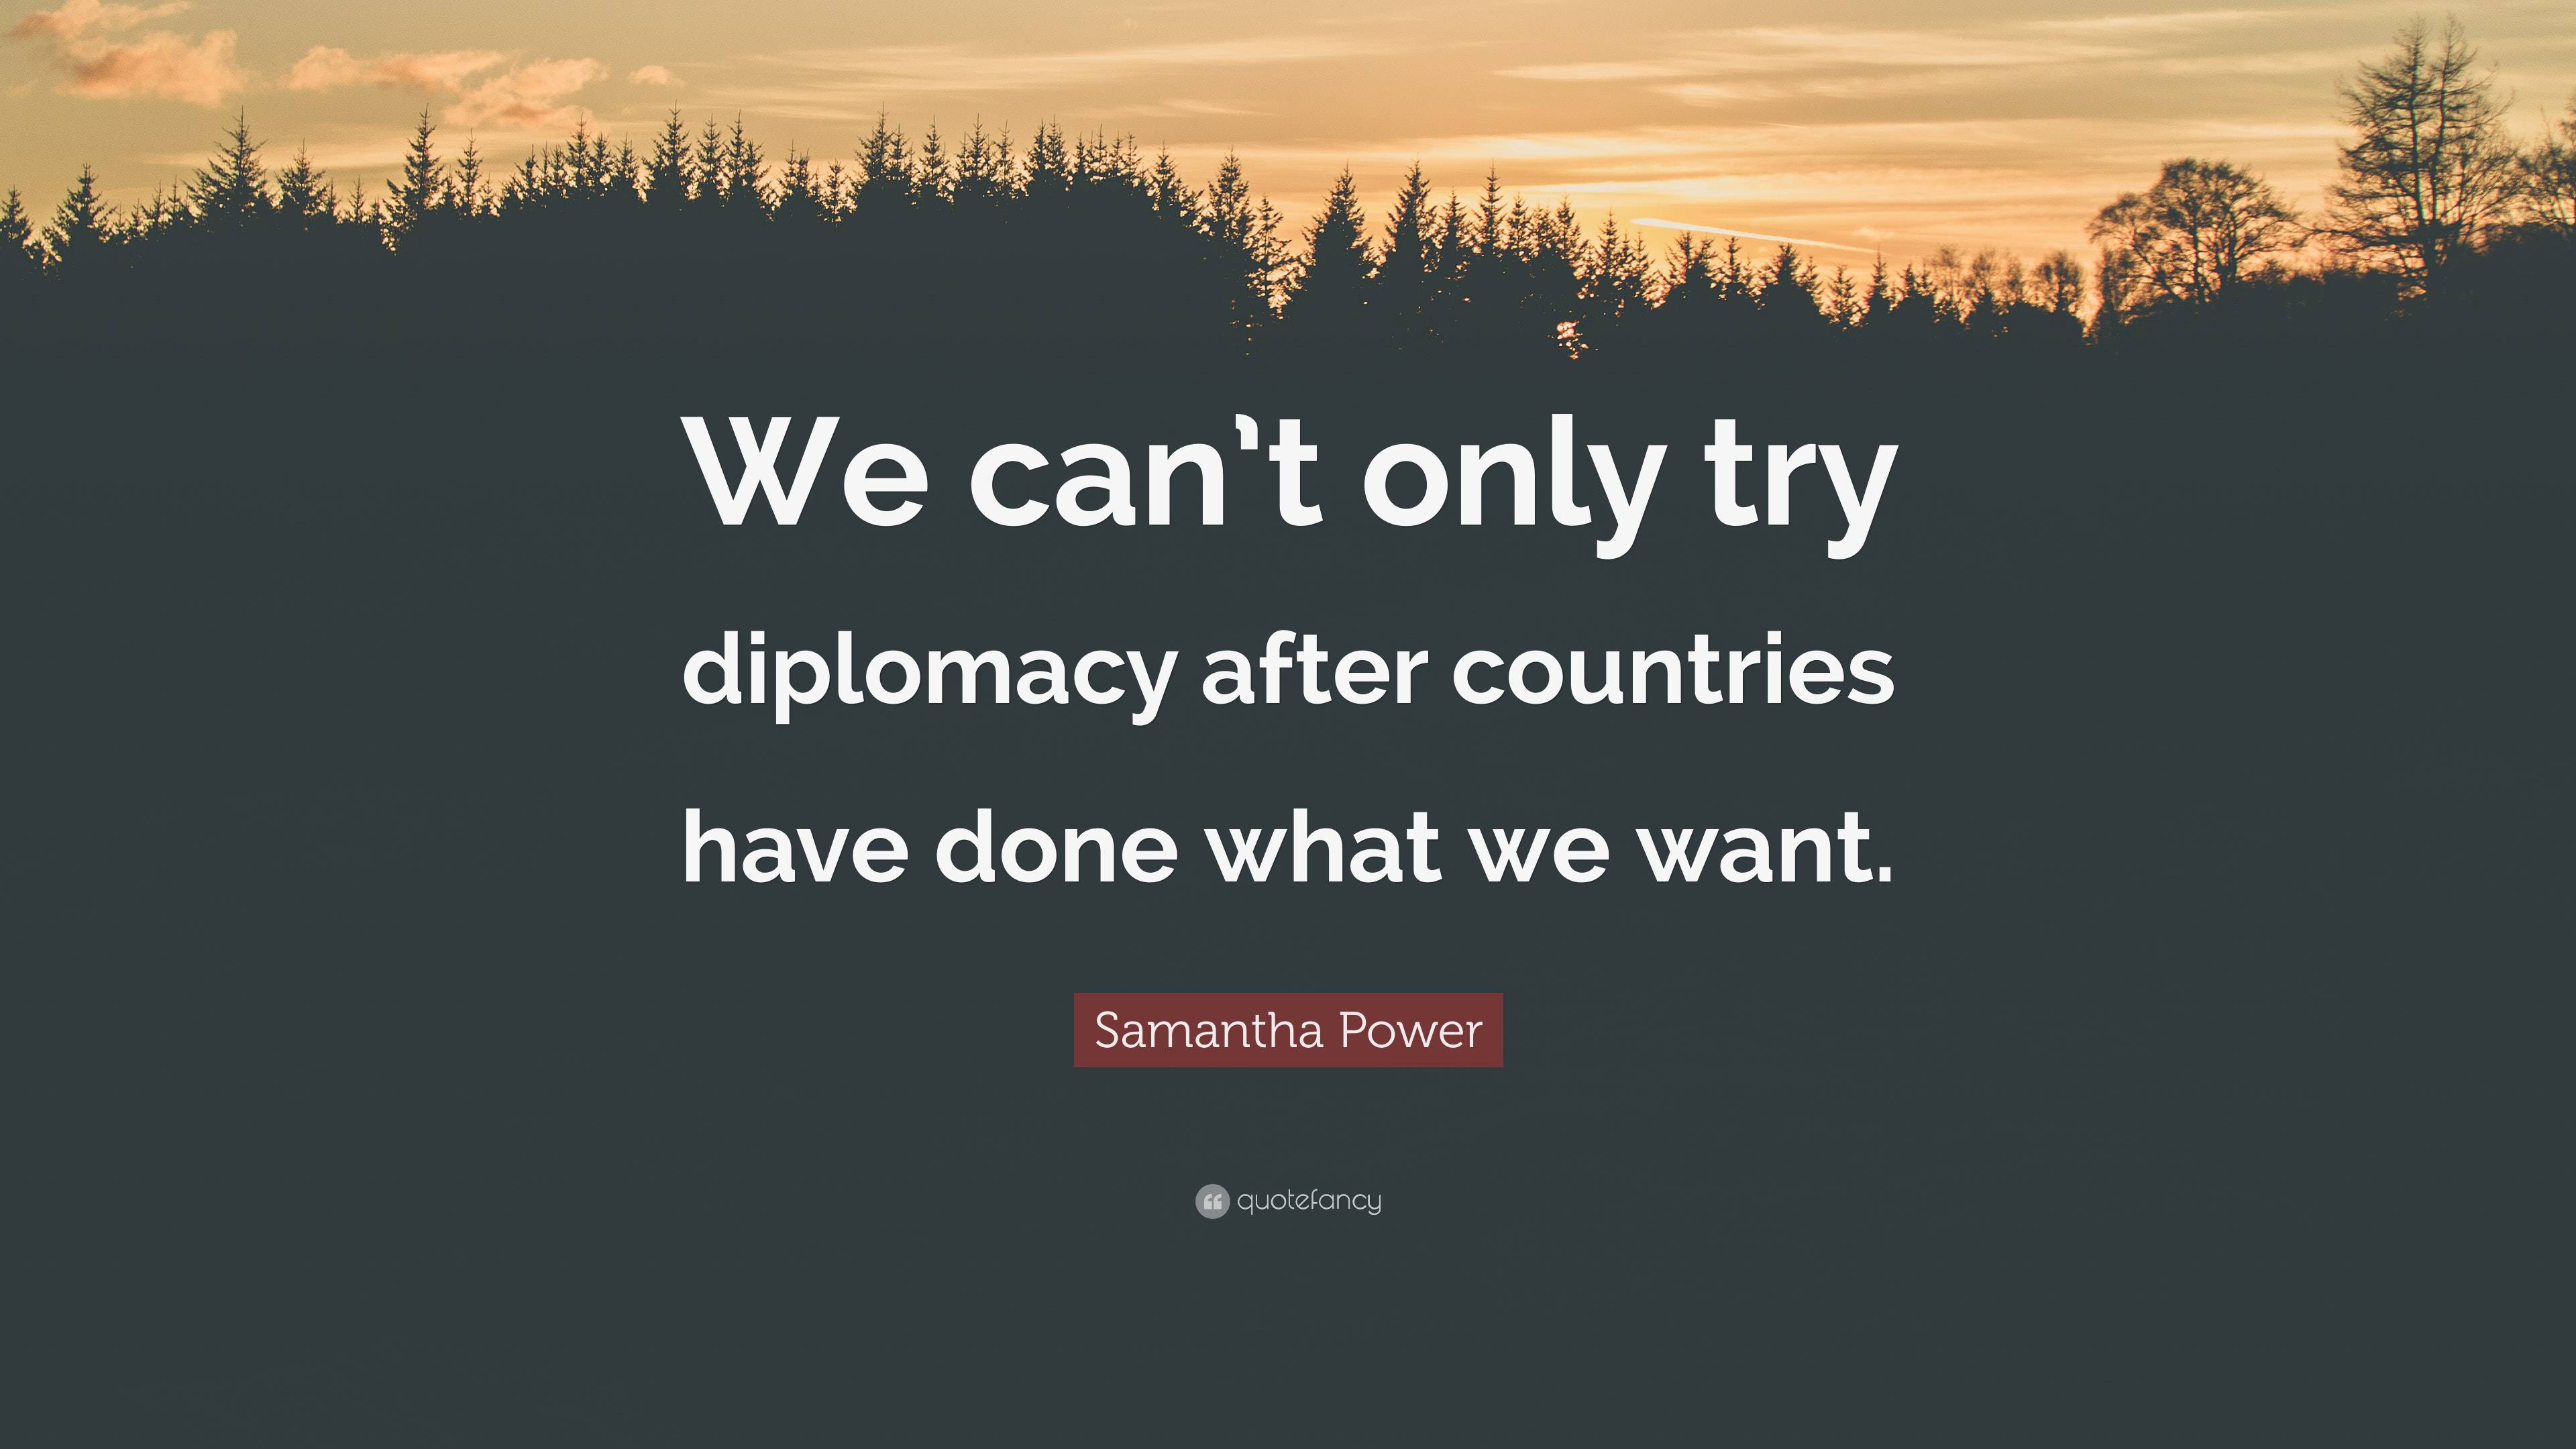 Samantha Power Quote: “We can’t only try diplomacy after countries have ...